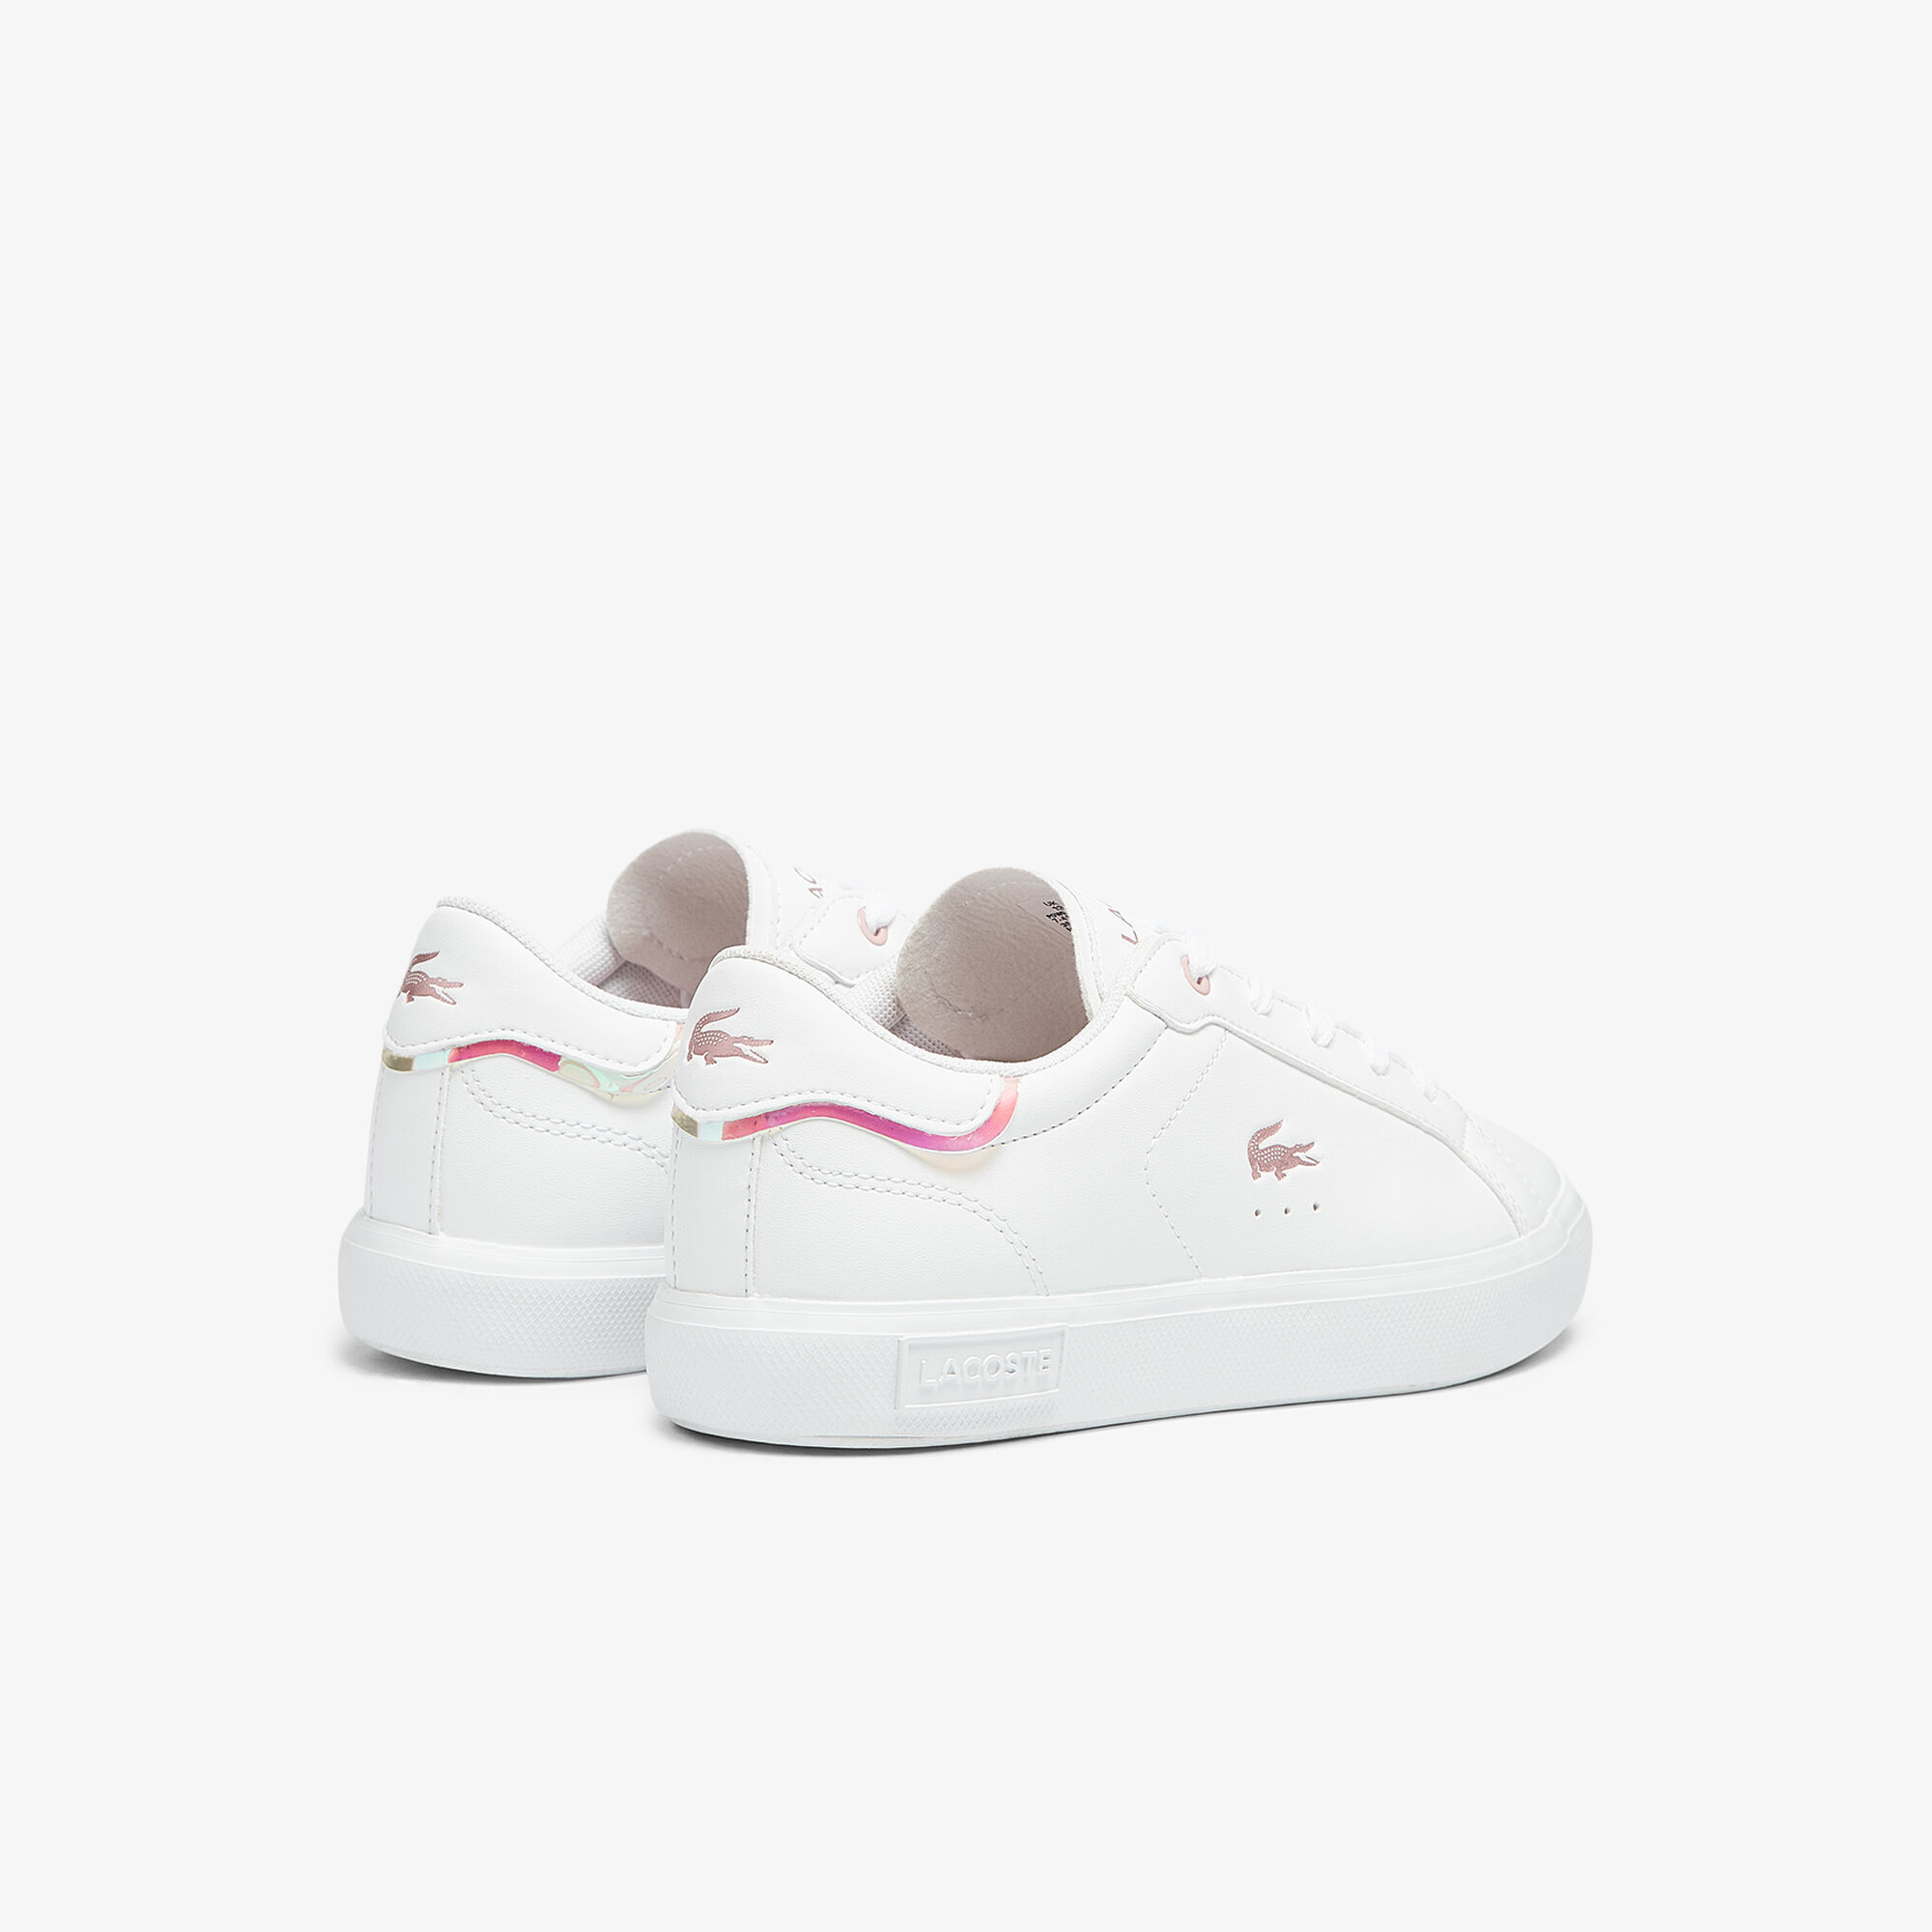 Children's Powercourt Synthetic Metallic Accent Trainers